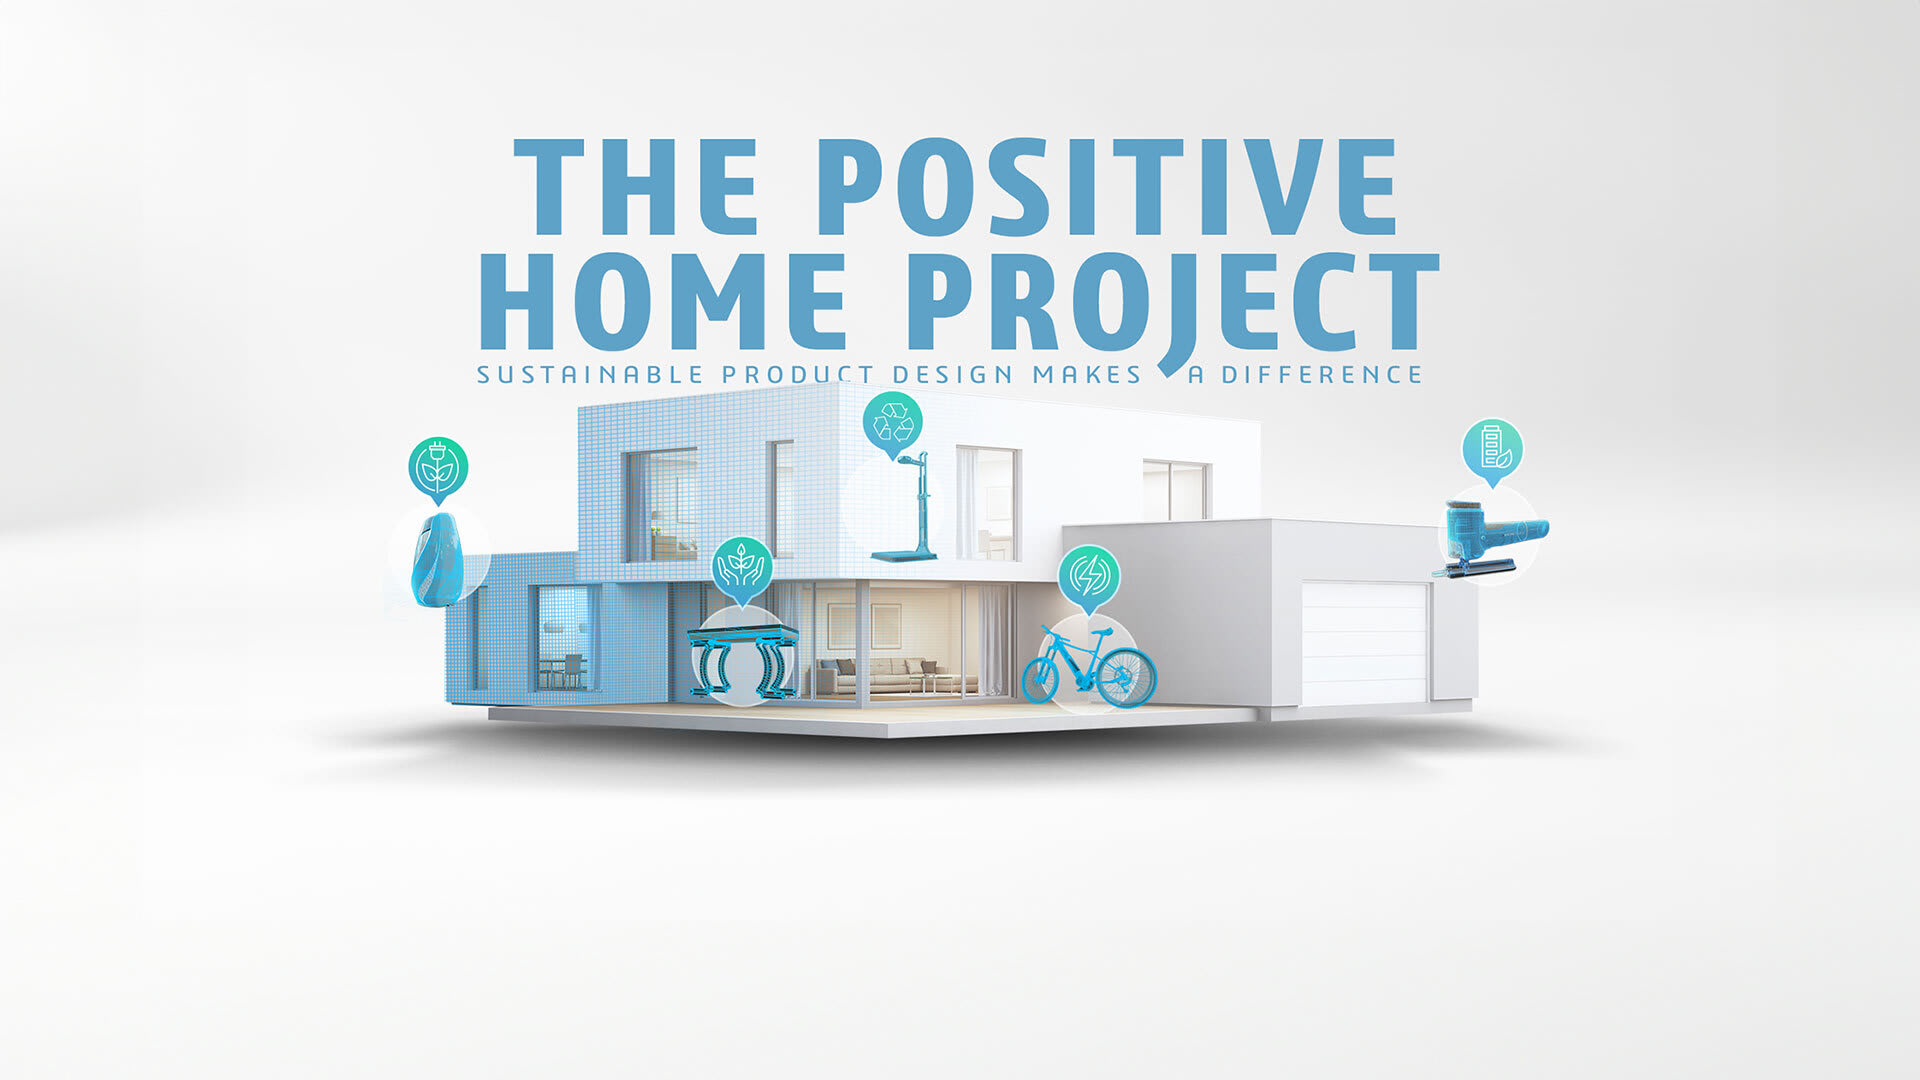 The Positive Home Project 1920x1080 V2